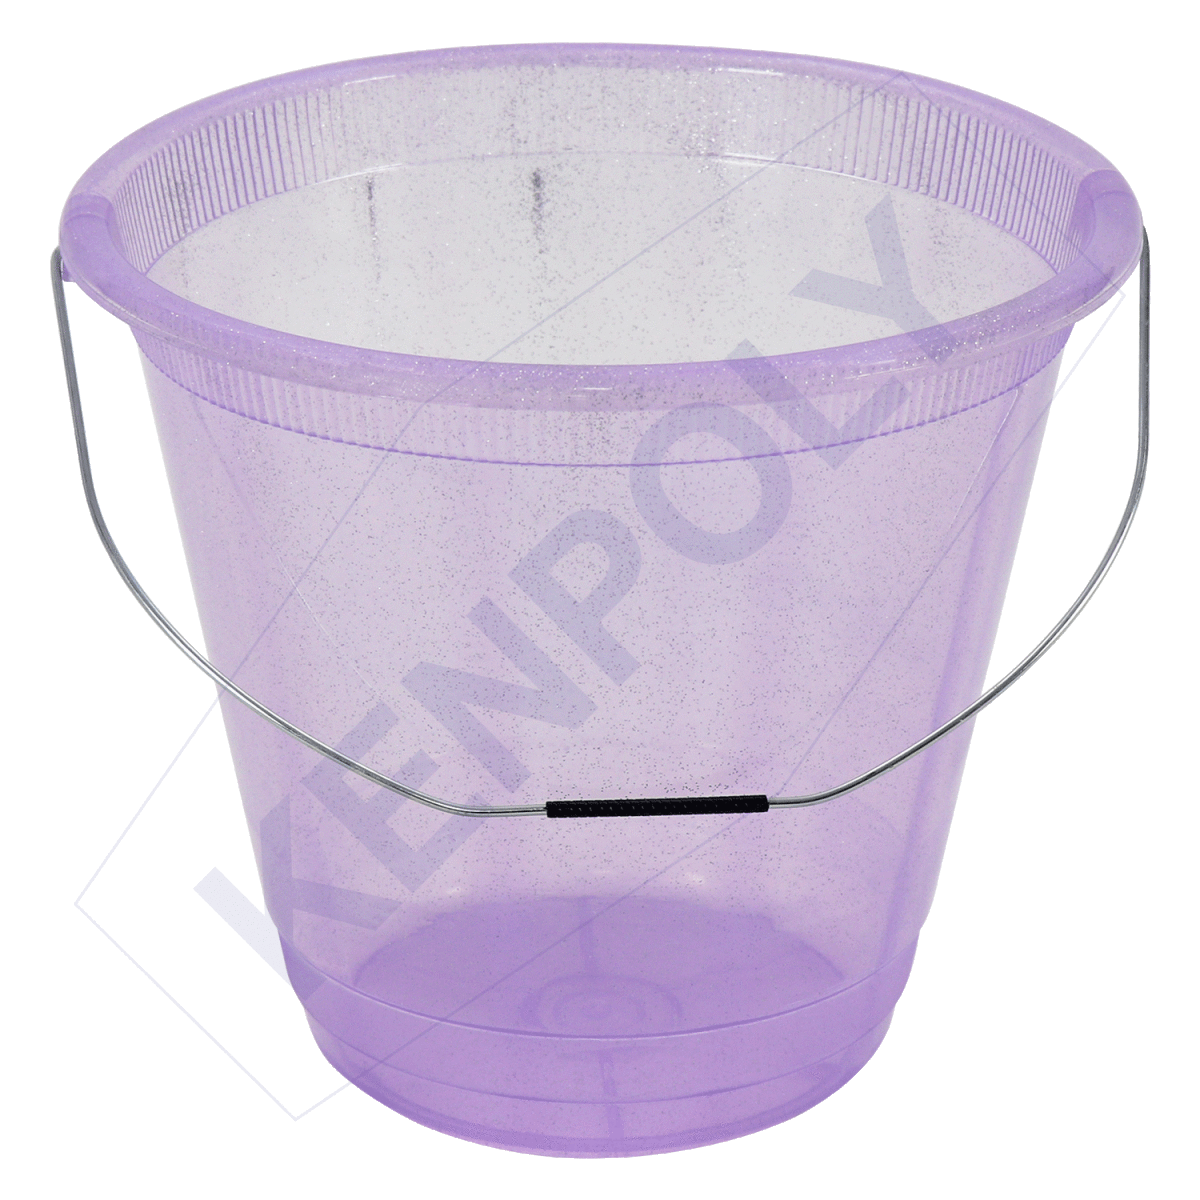 Smiley 10 Bucket Without Lid